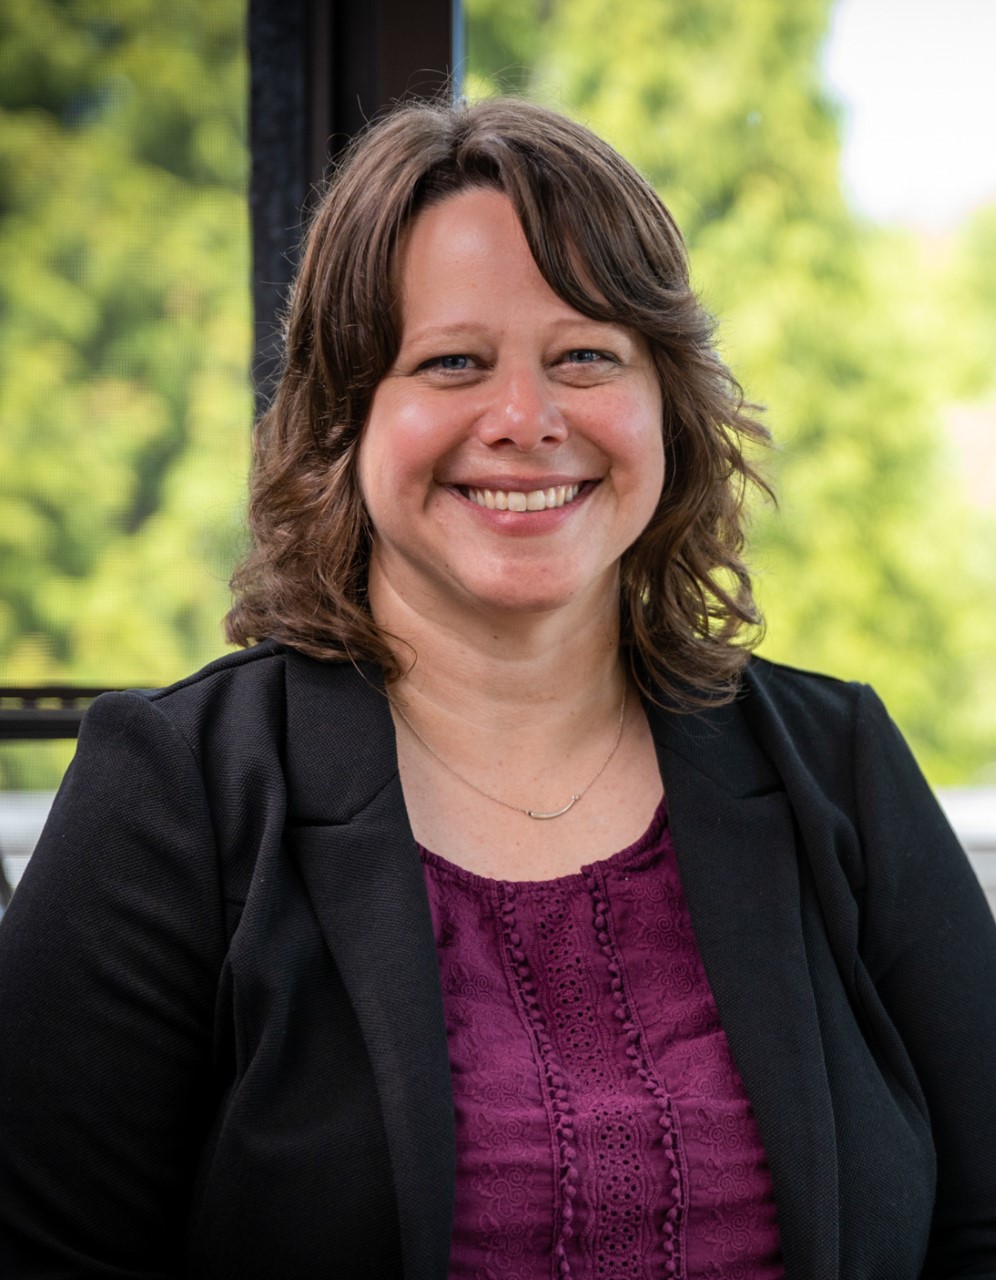 Headshot of our Executive Director, Jennifer Knapp. She is a white woman, with brown shoulder-length hair. She is wearing a dark purple top with a black blazer.